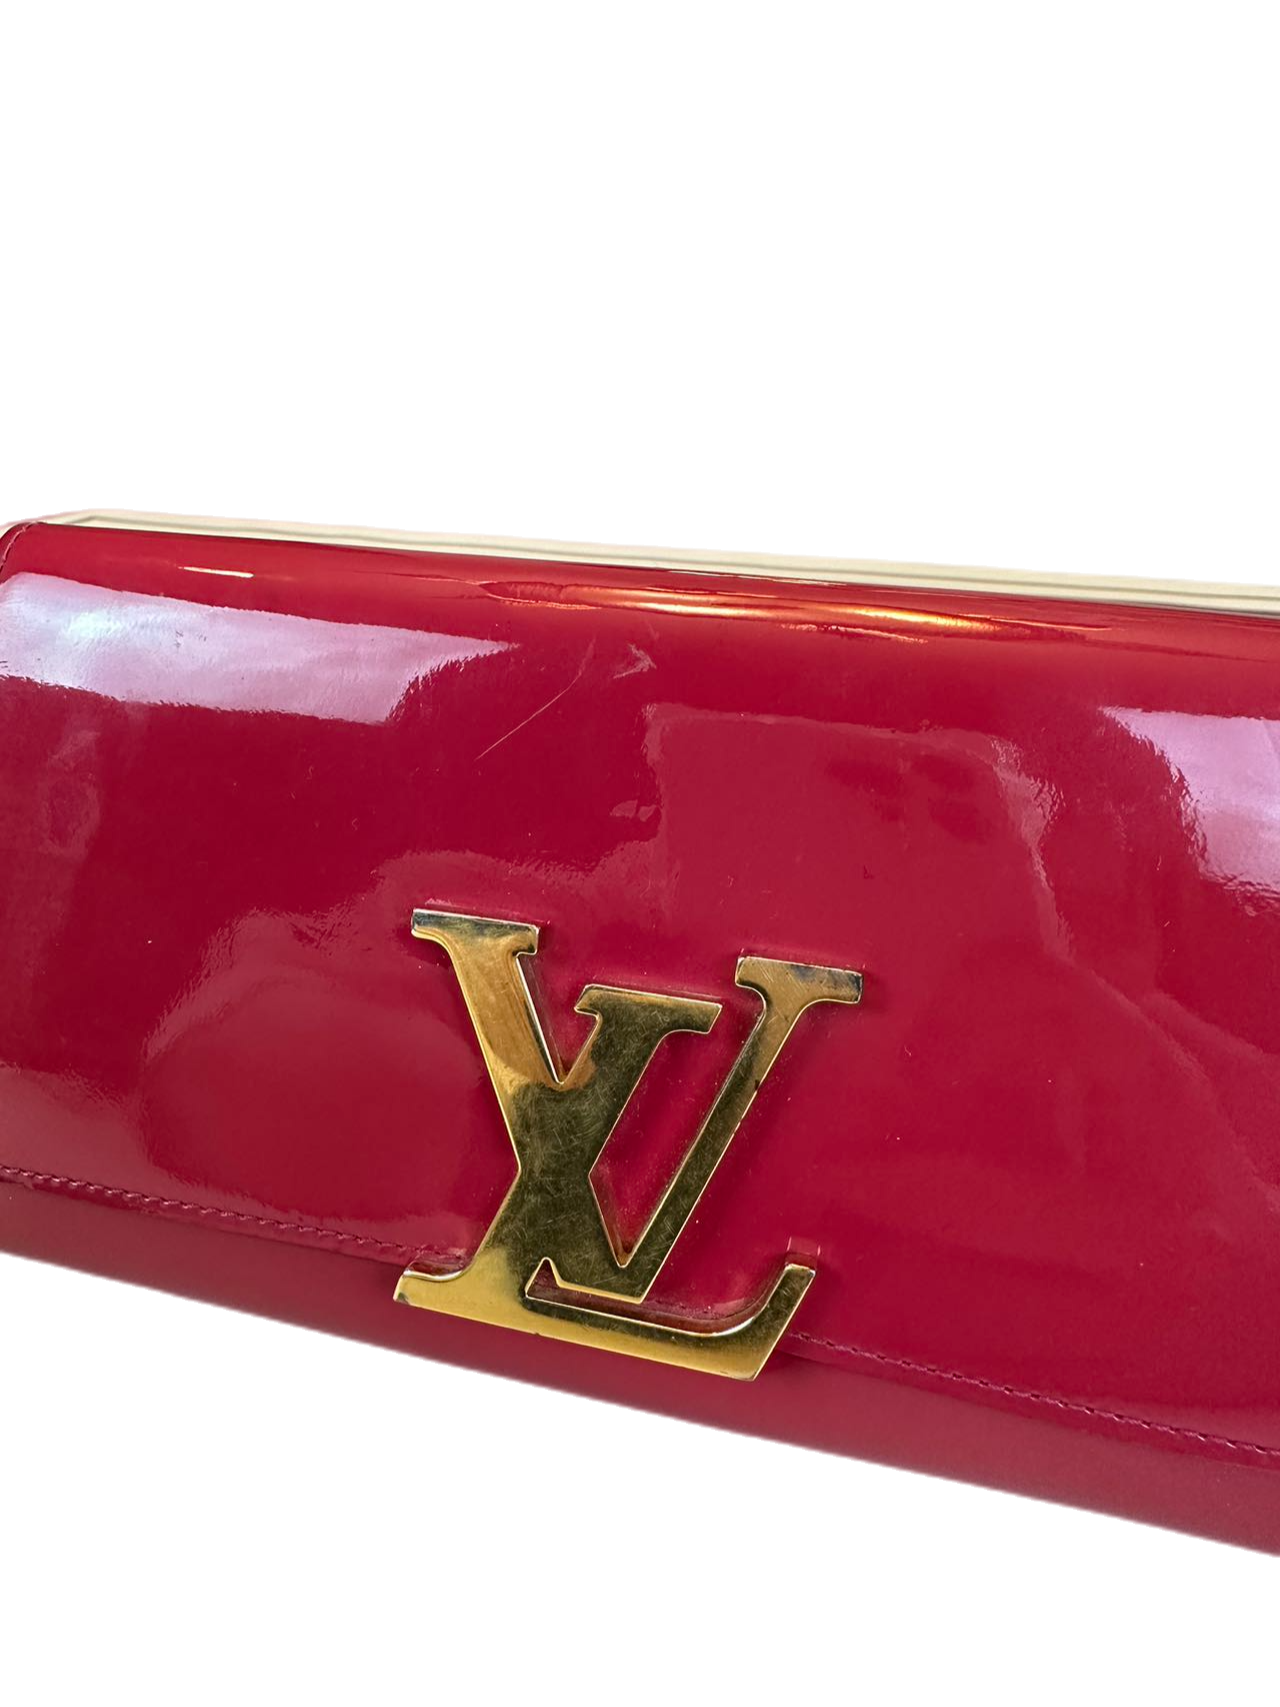 Preloved Louis Vuitton Red Patent Leather Wallet